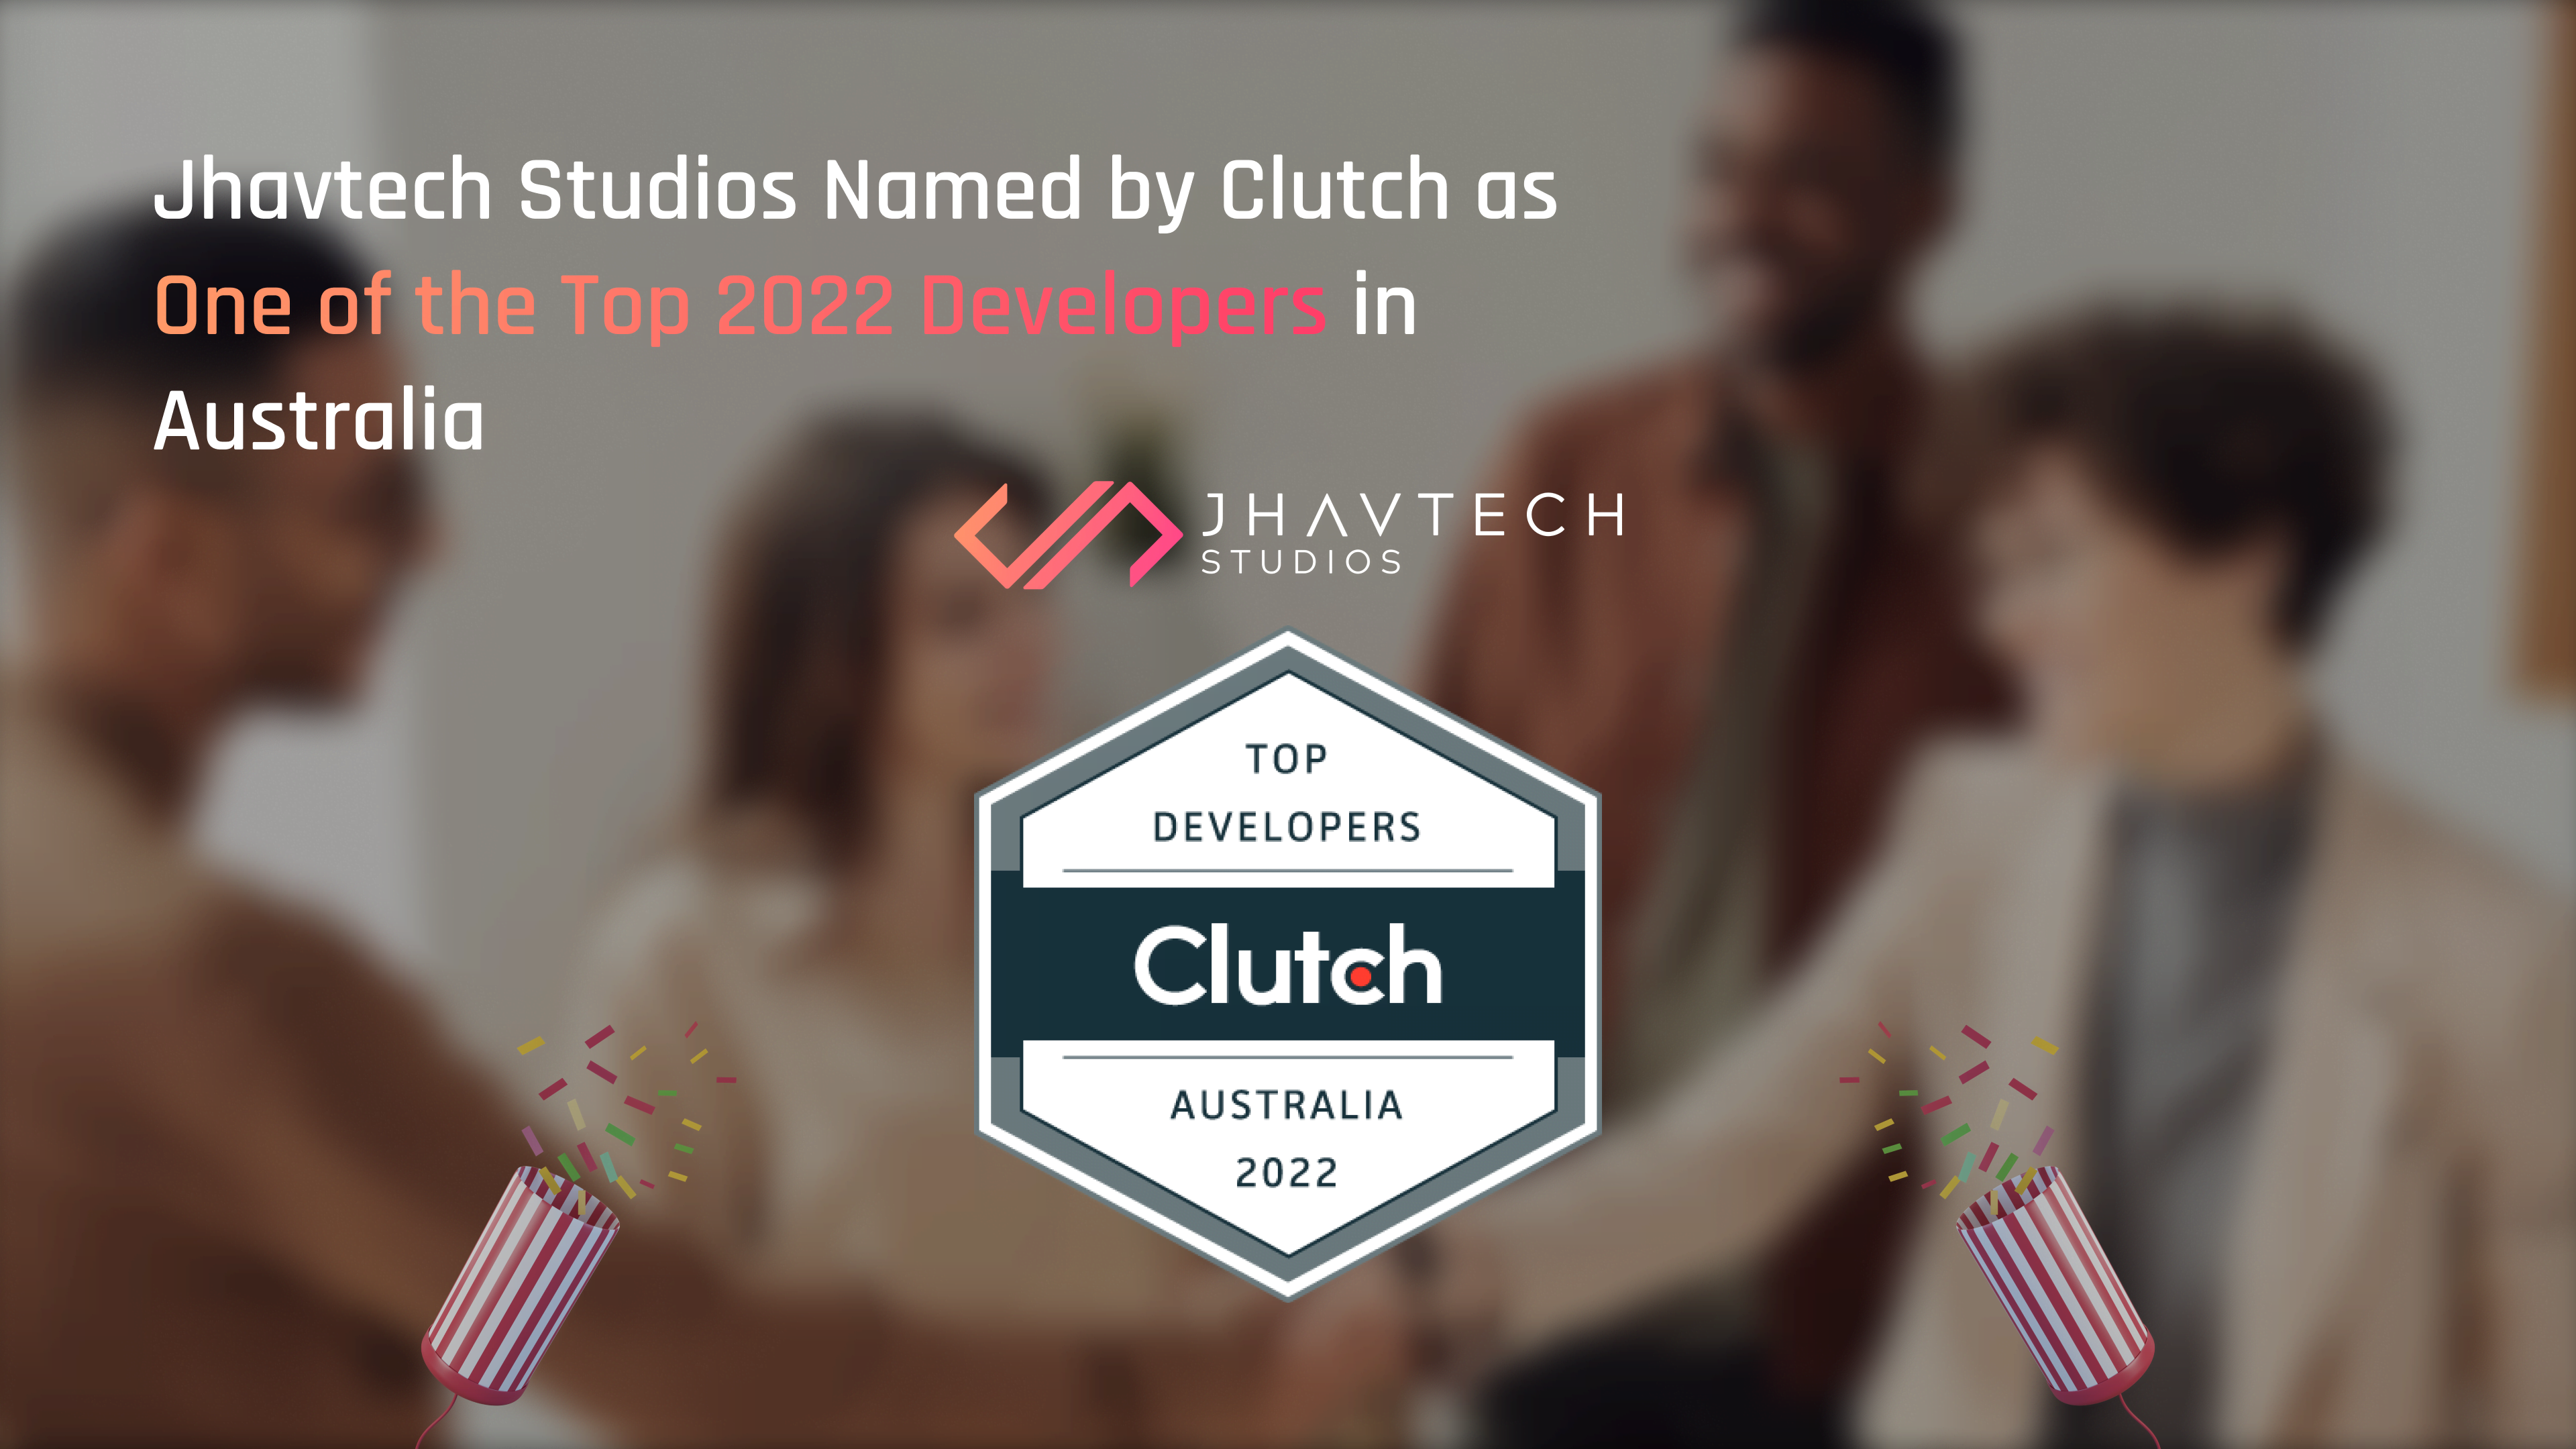 Jhavtech Studios Named by Clutch as One of the Top 2022 Developers in Australia